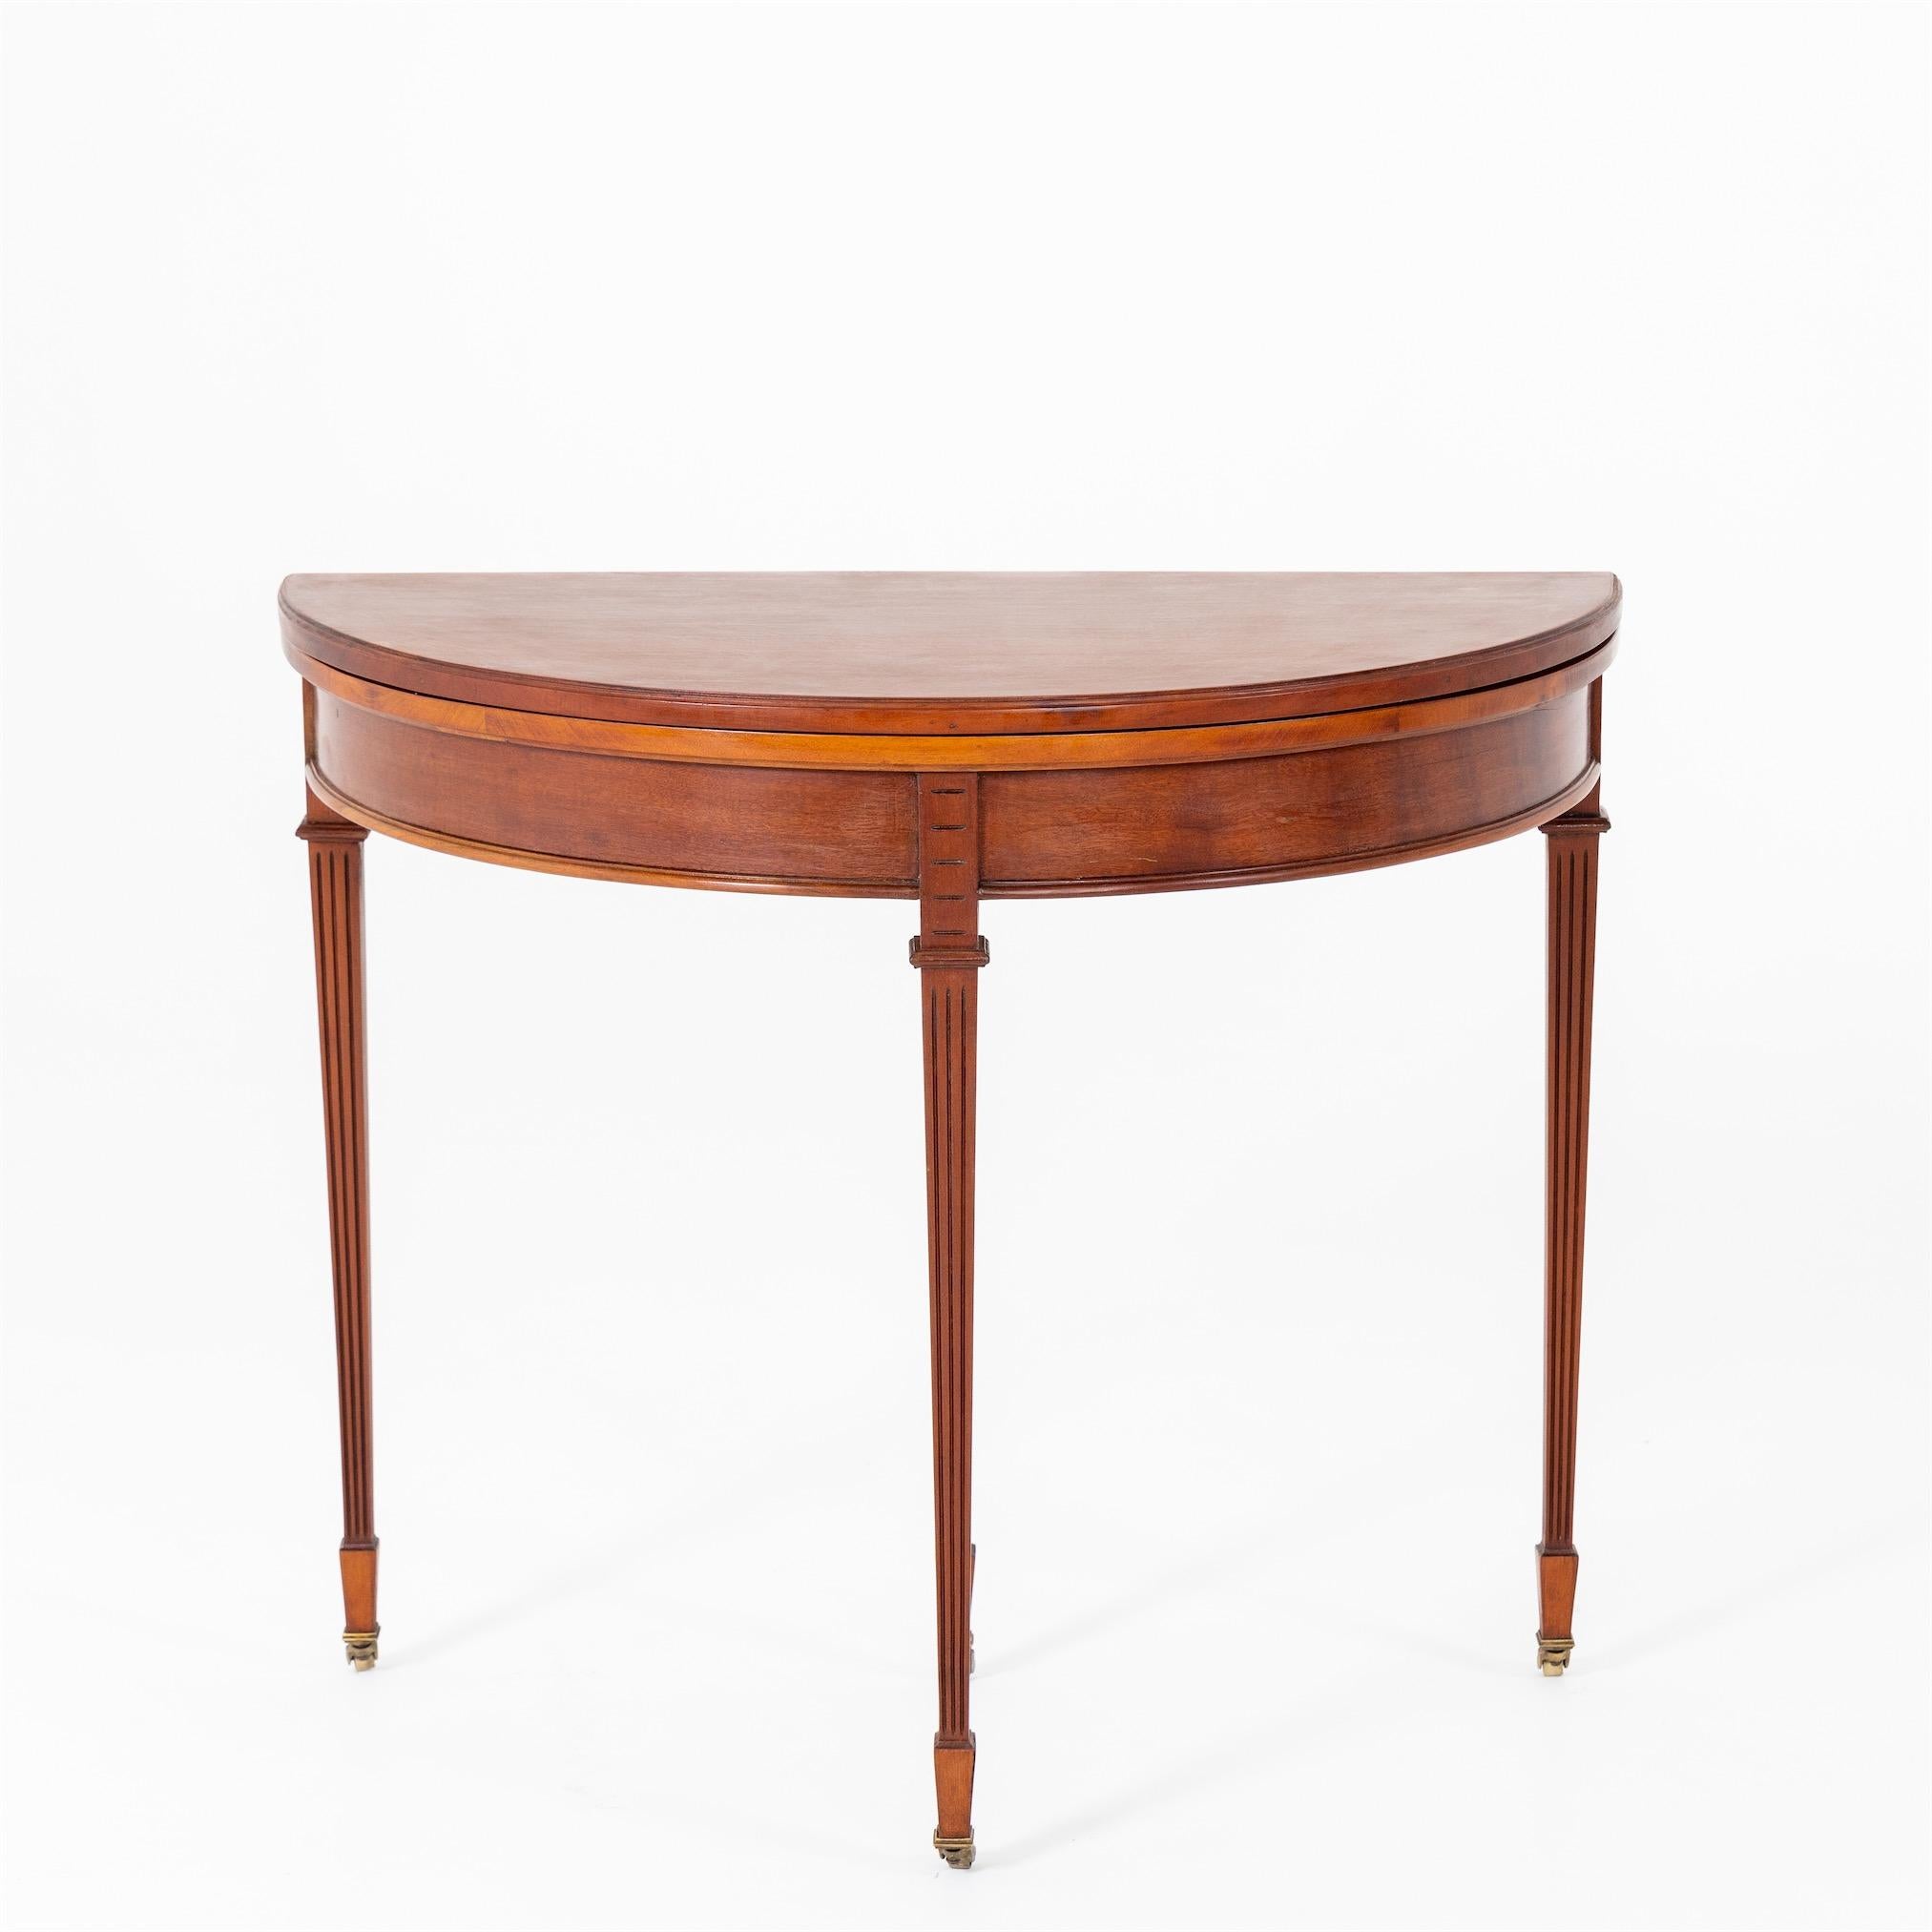 Demi-lune table made of mahogany, solid and veneered, and standing on four fluted pointed legs with brass castors. The hinged tabletop is covered with green leather on the inside.